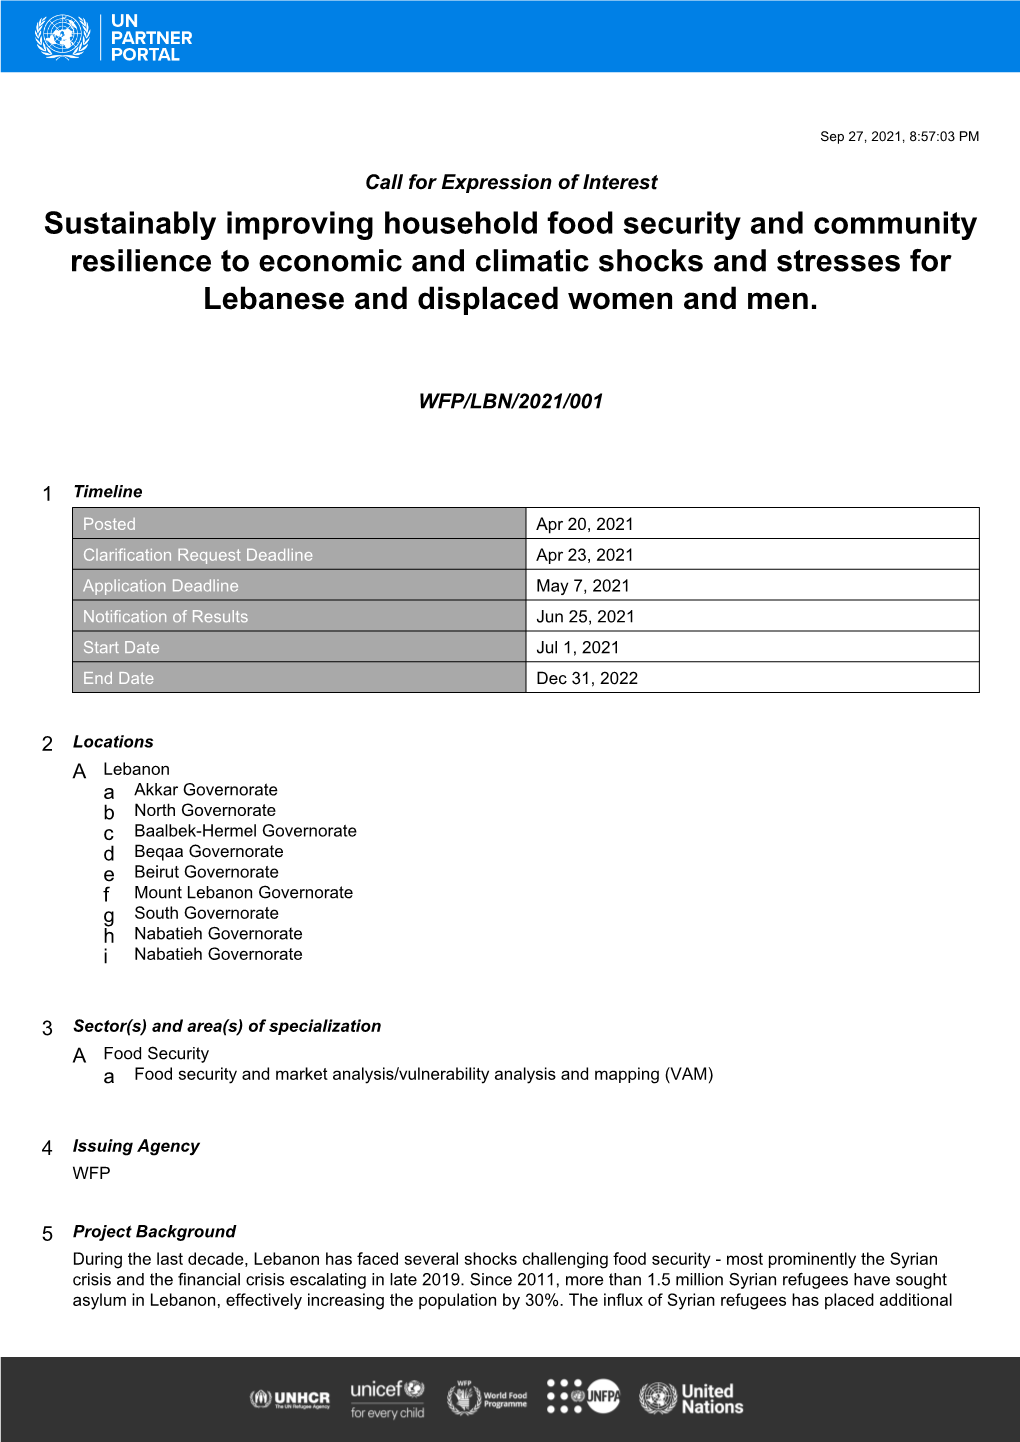 Sustainably Improving Household Food Security and Community Resilience to Economic and Climatic Shocks and Stresses for Lebanese and Displaced Women and Men